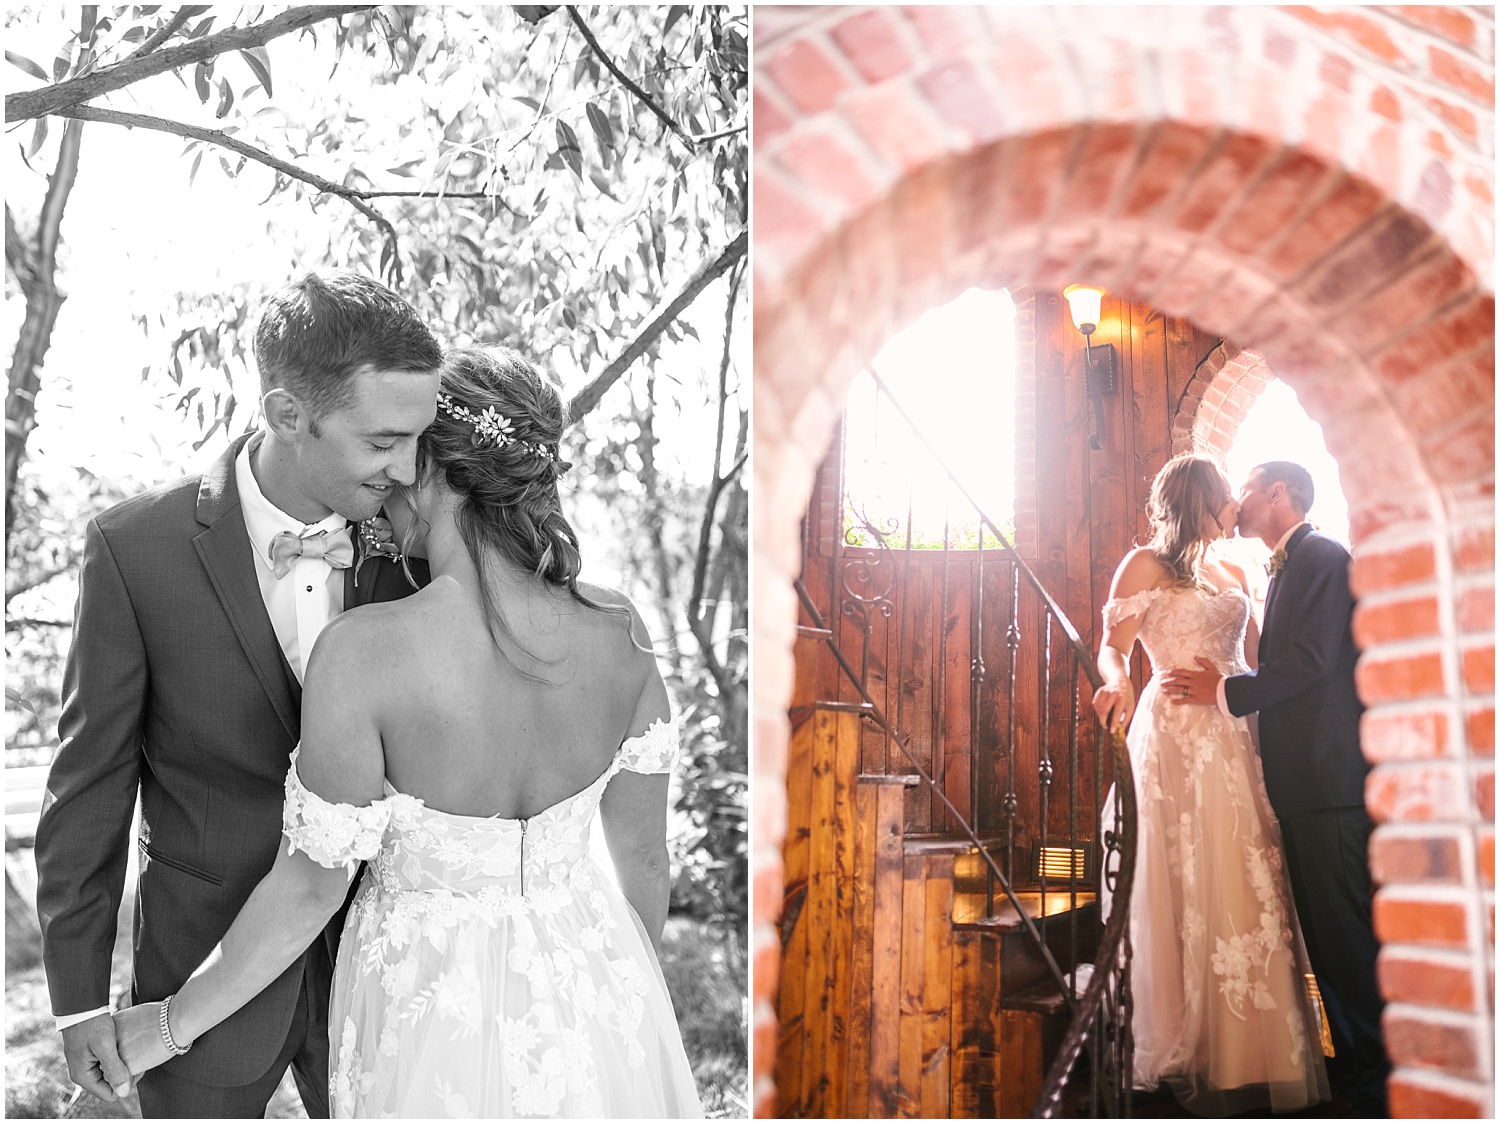 Bride and groom portraits at Crooked Willow Farms wedding